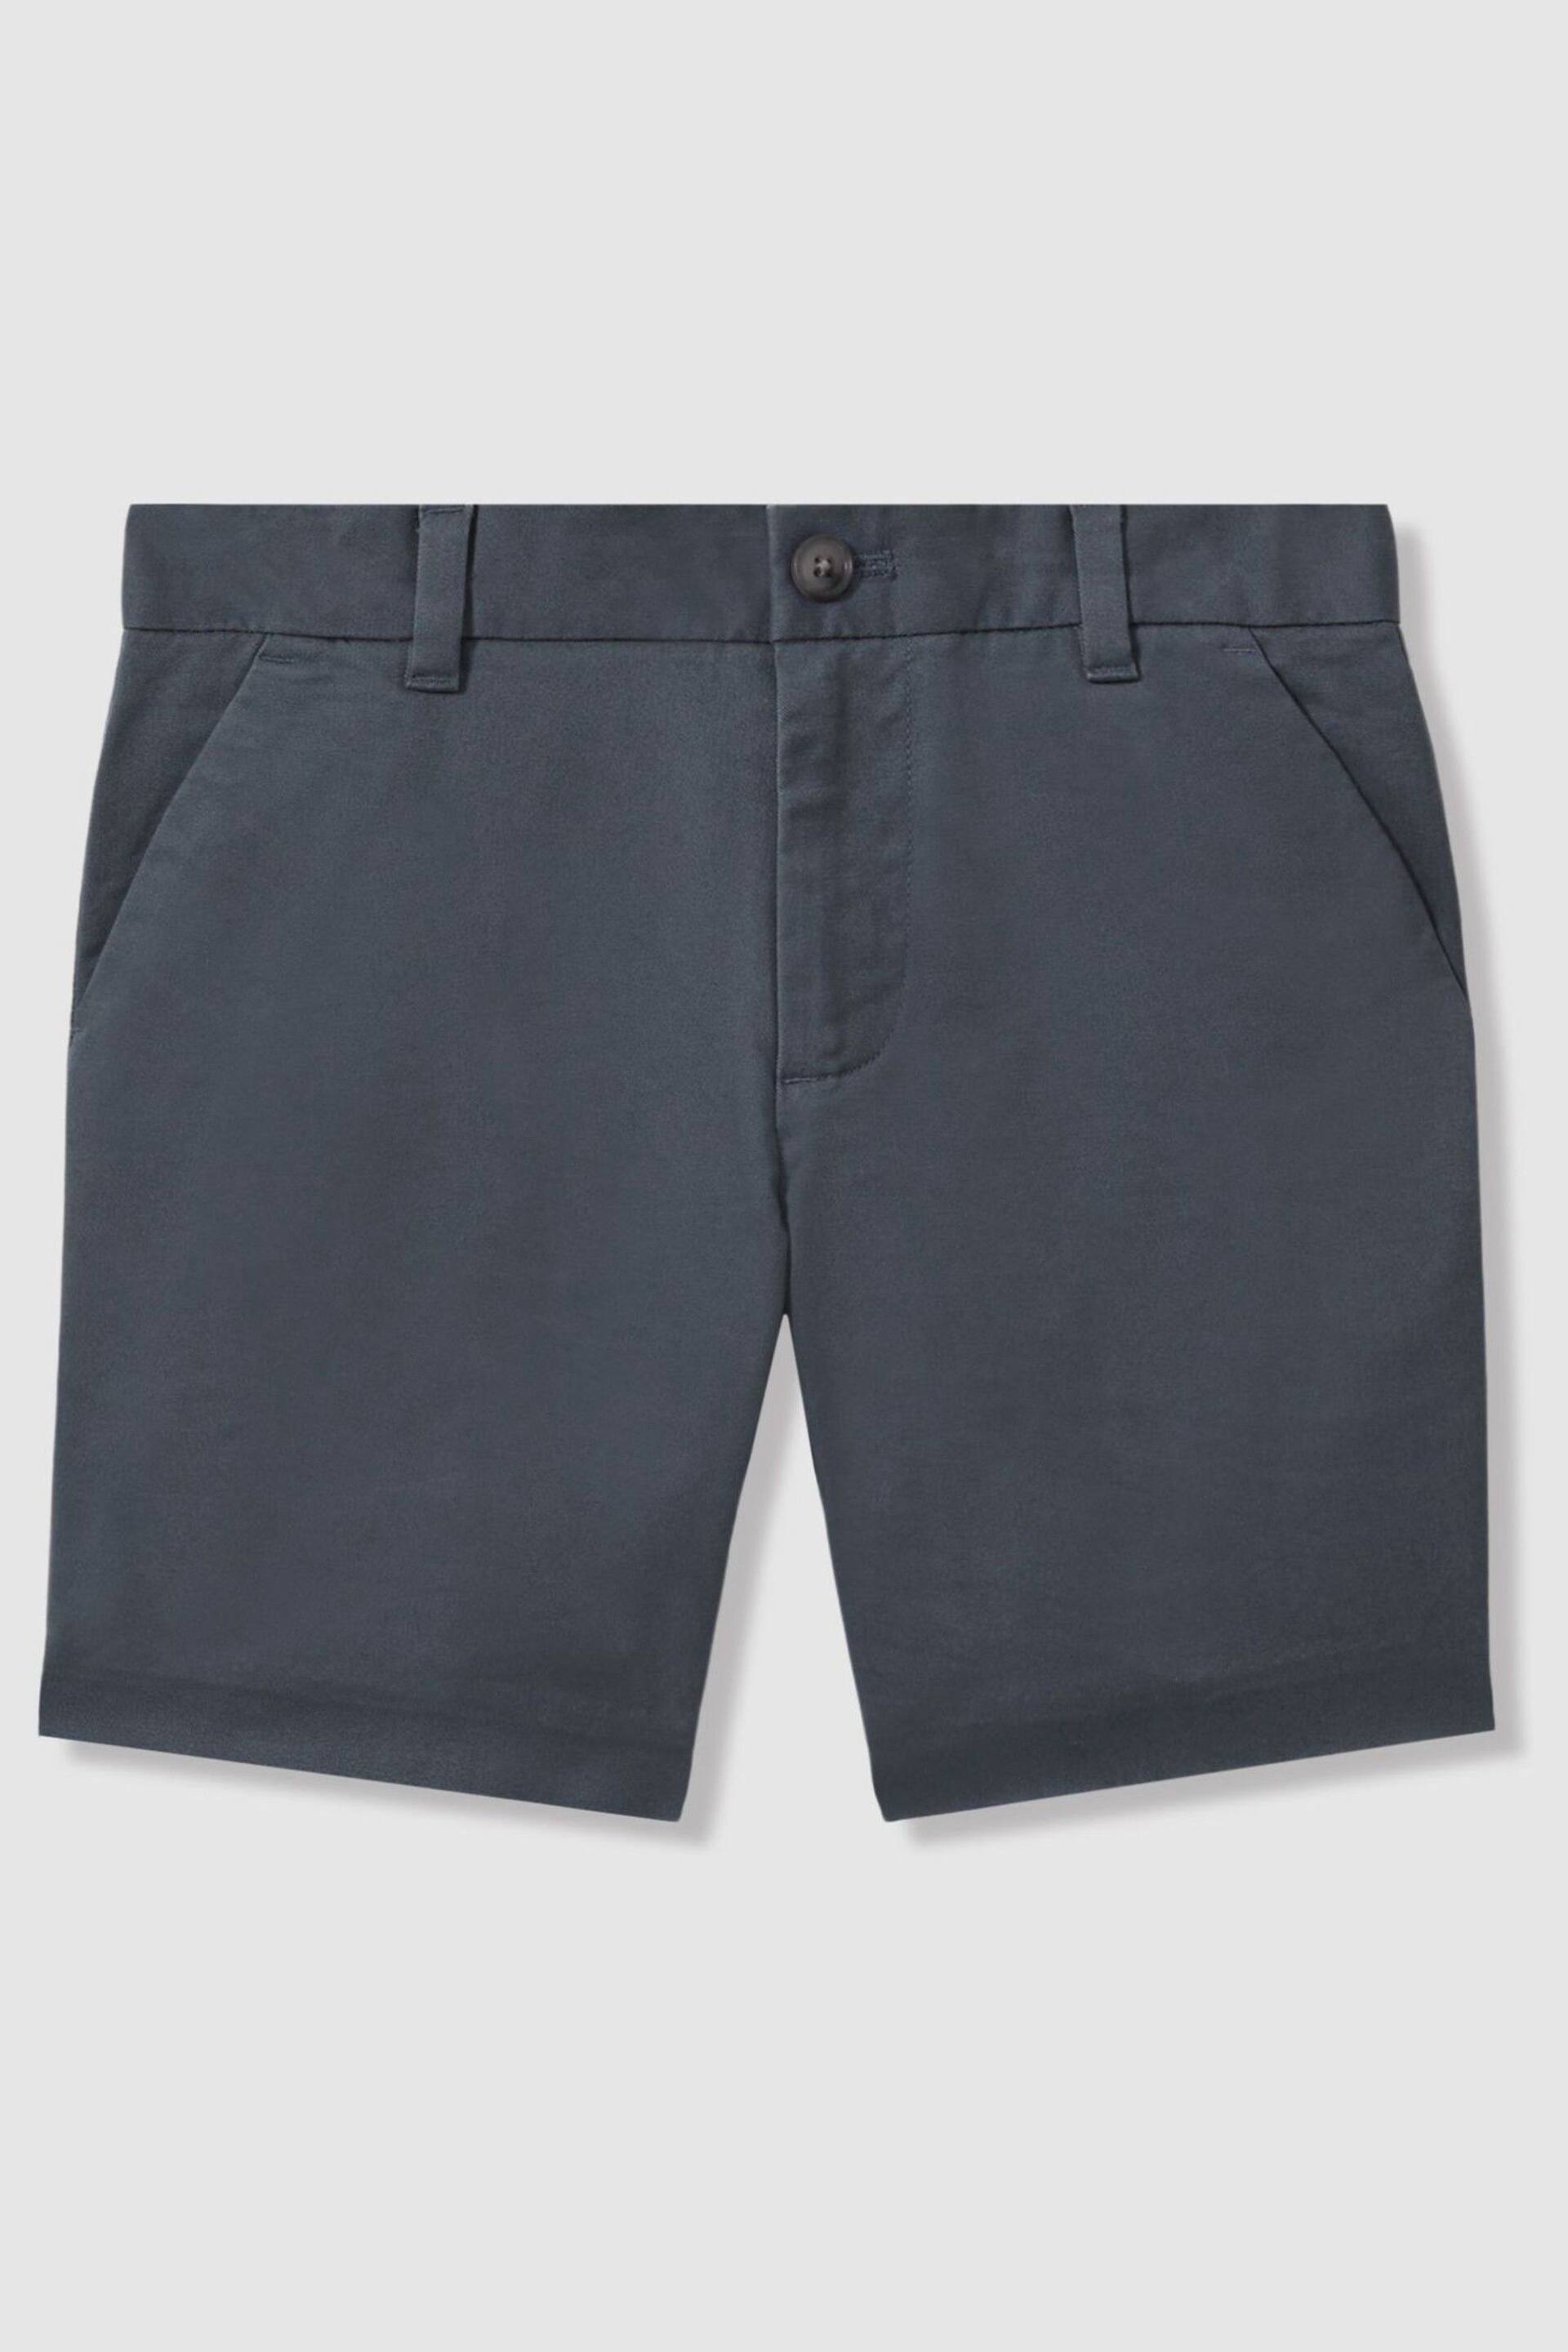 Reiss Airforce Blue Wicket Senior Casual Chino Shorts - Image 2 of 6